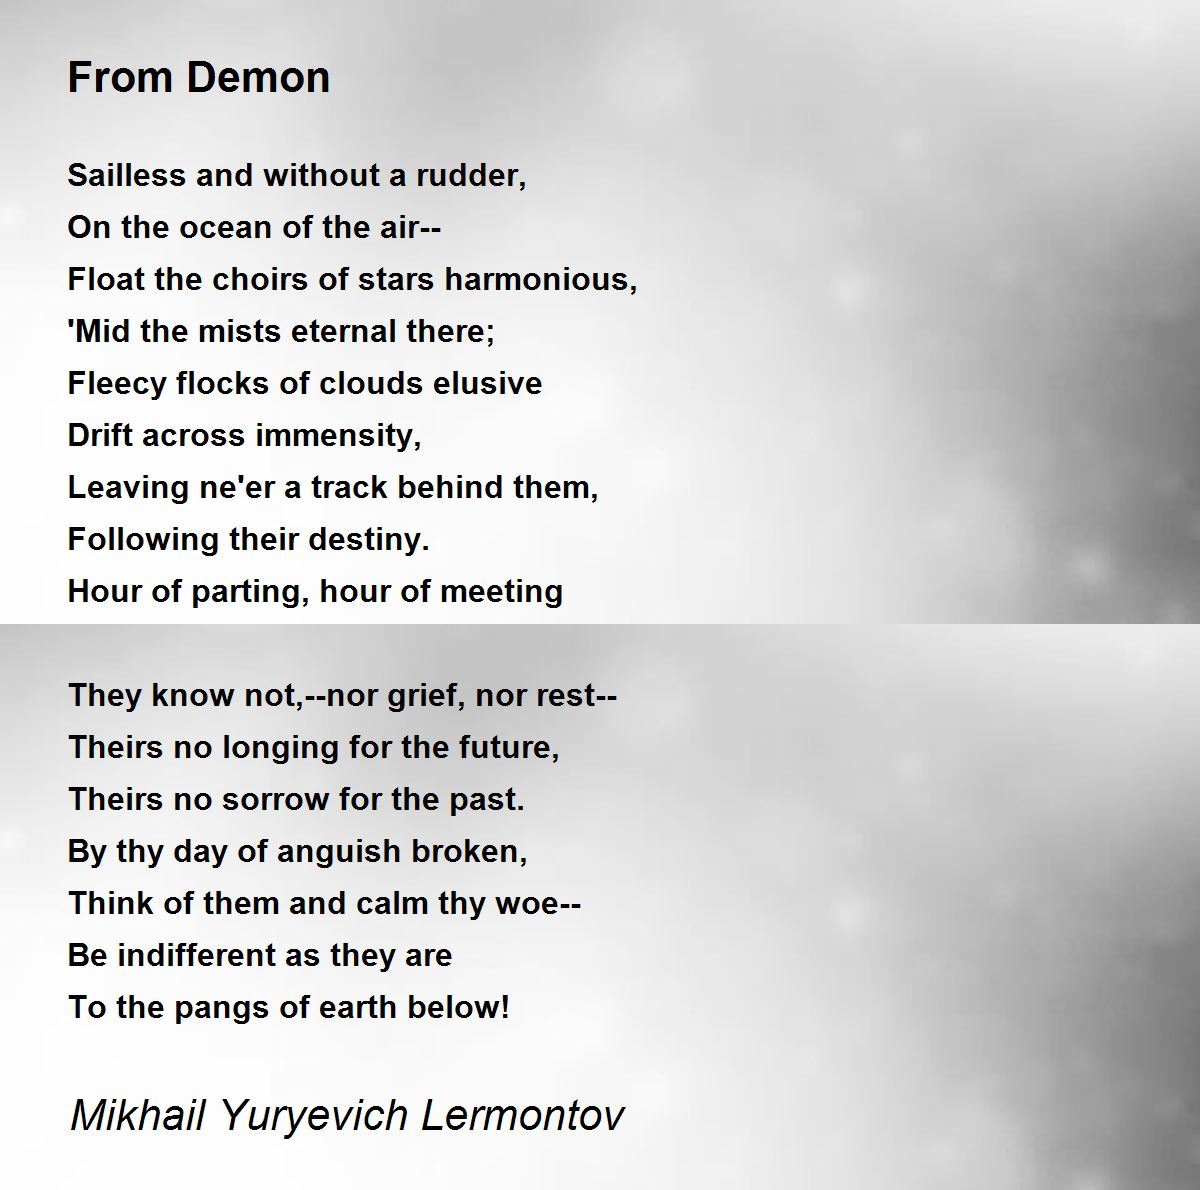 From Demon Poem By Mikhail Yuryevich